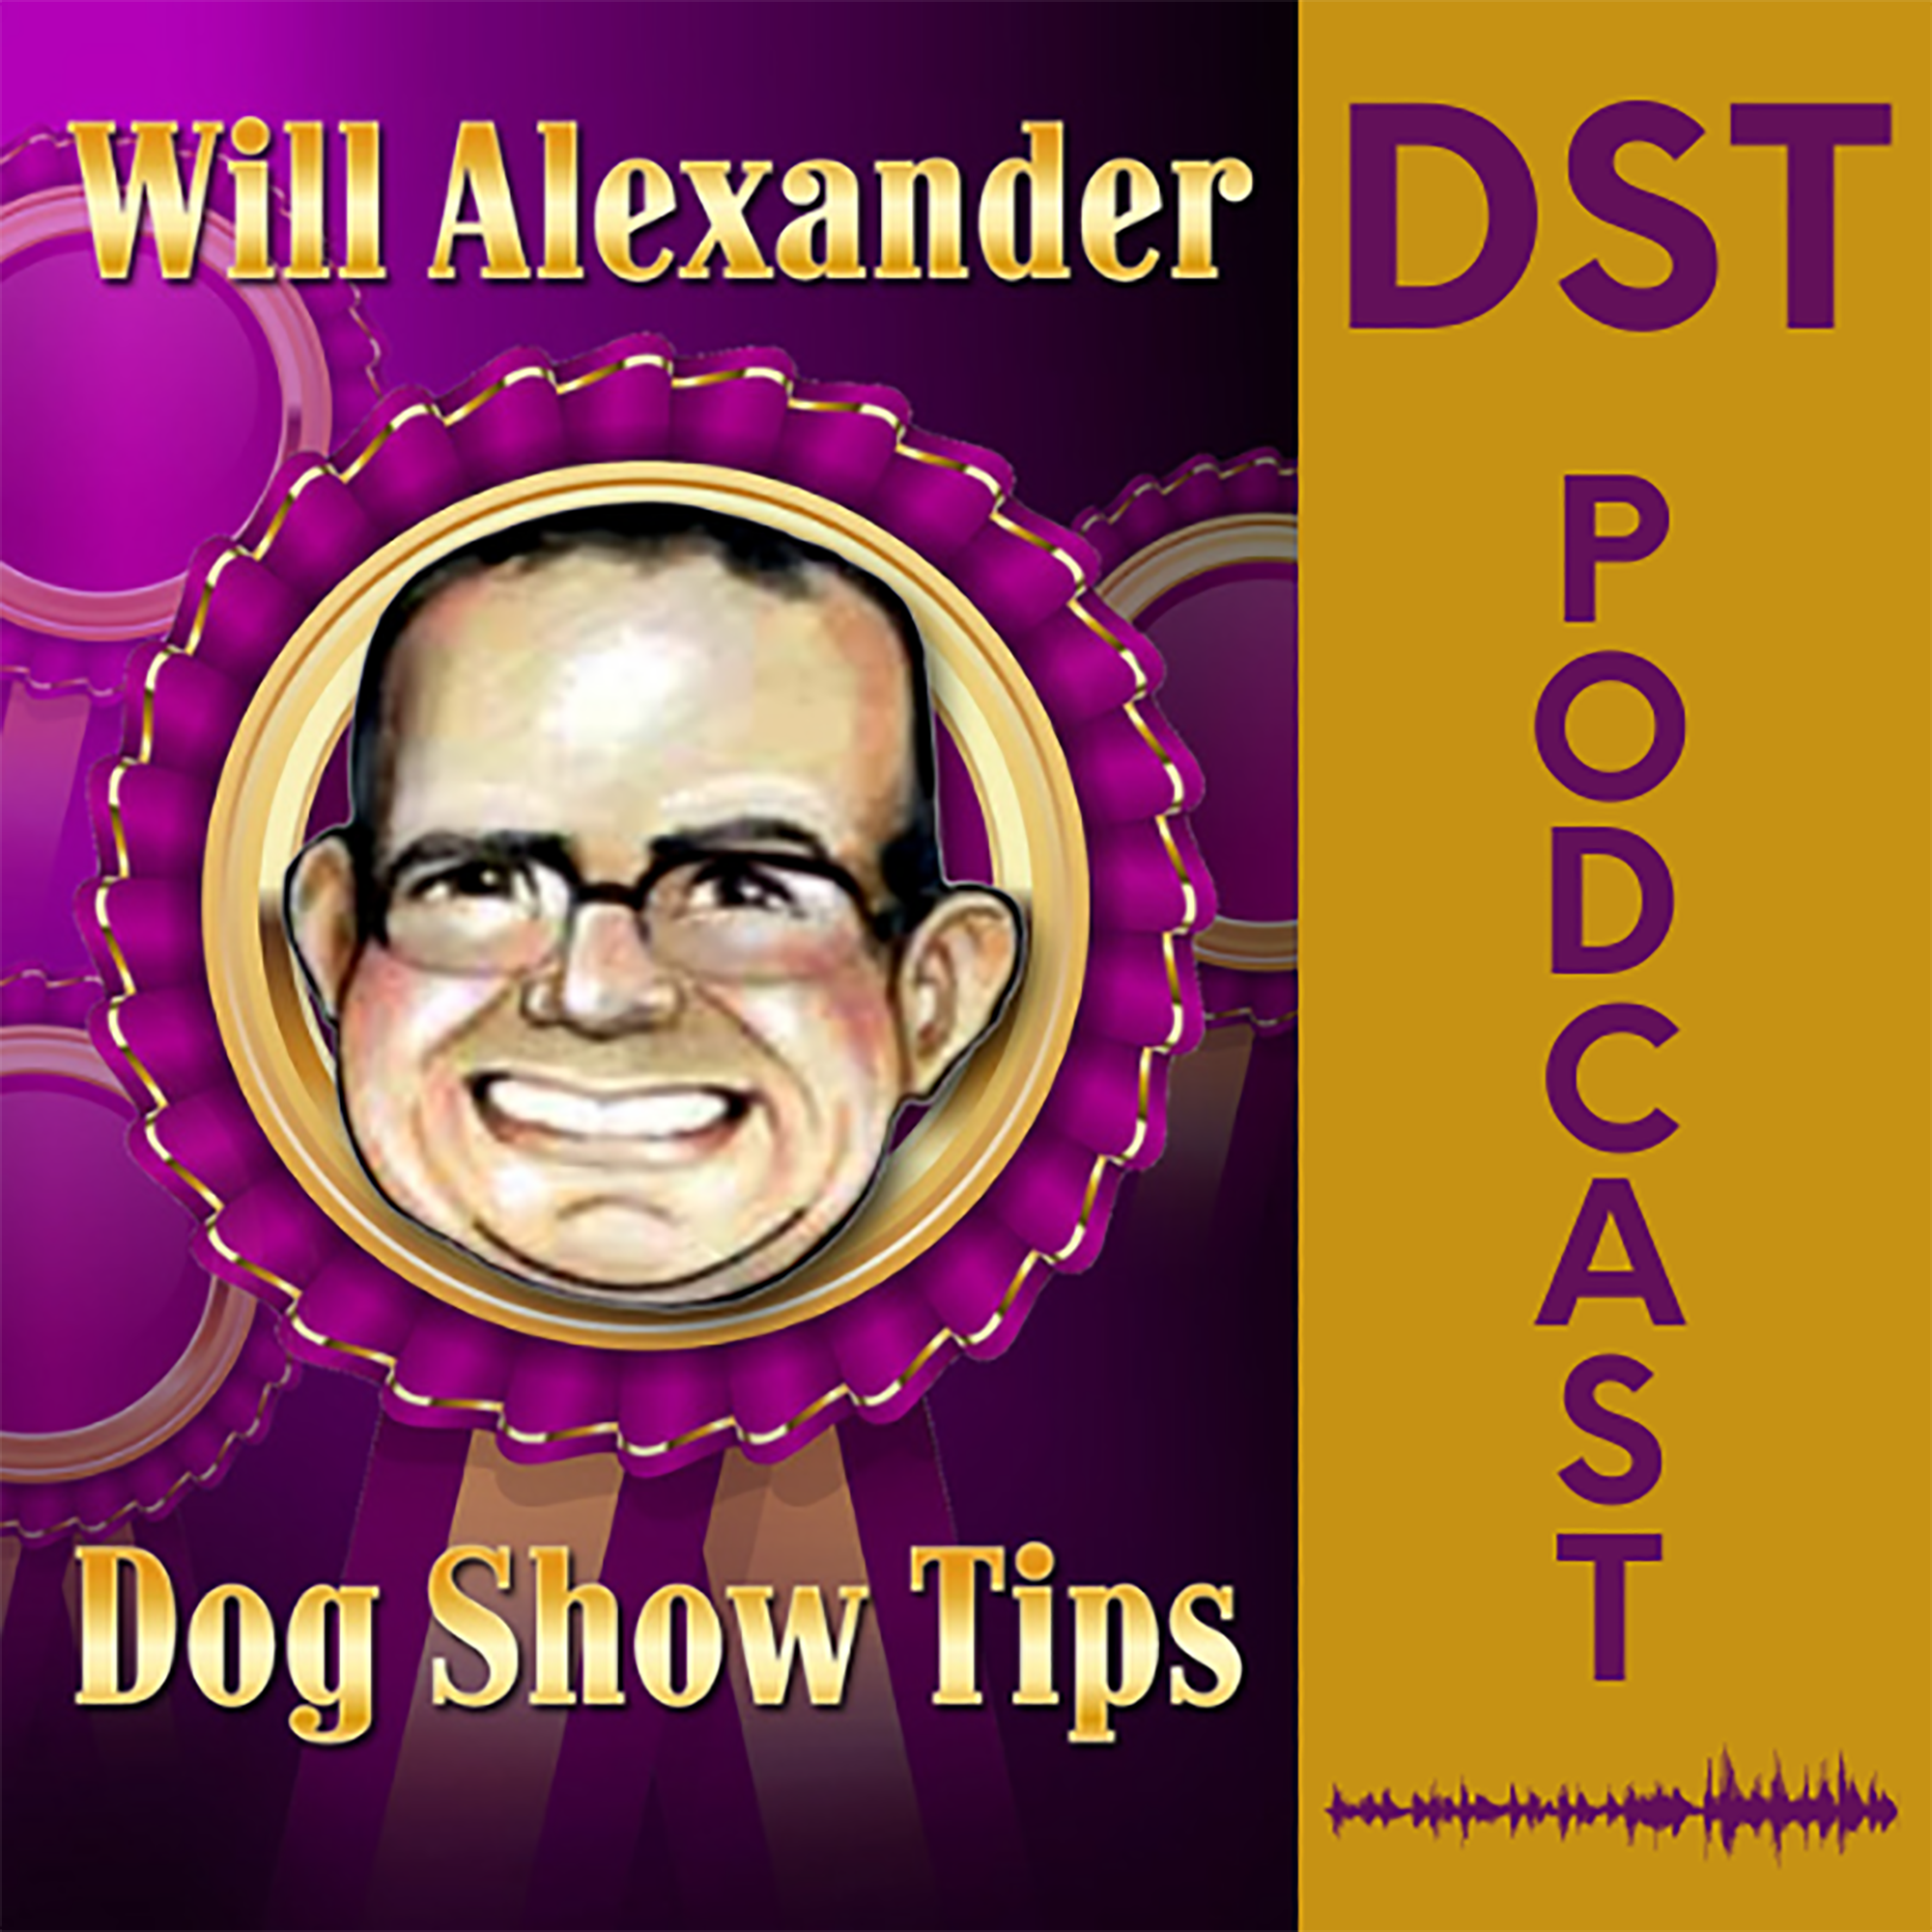 Dog Show Tips - Richard Powell interview with Will Alexander